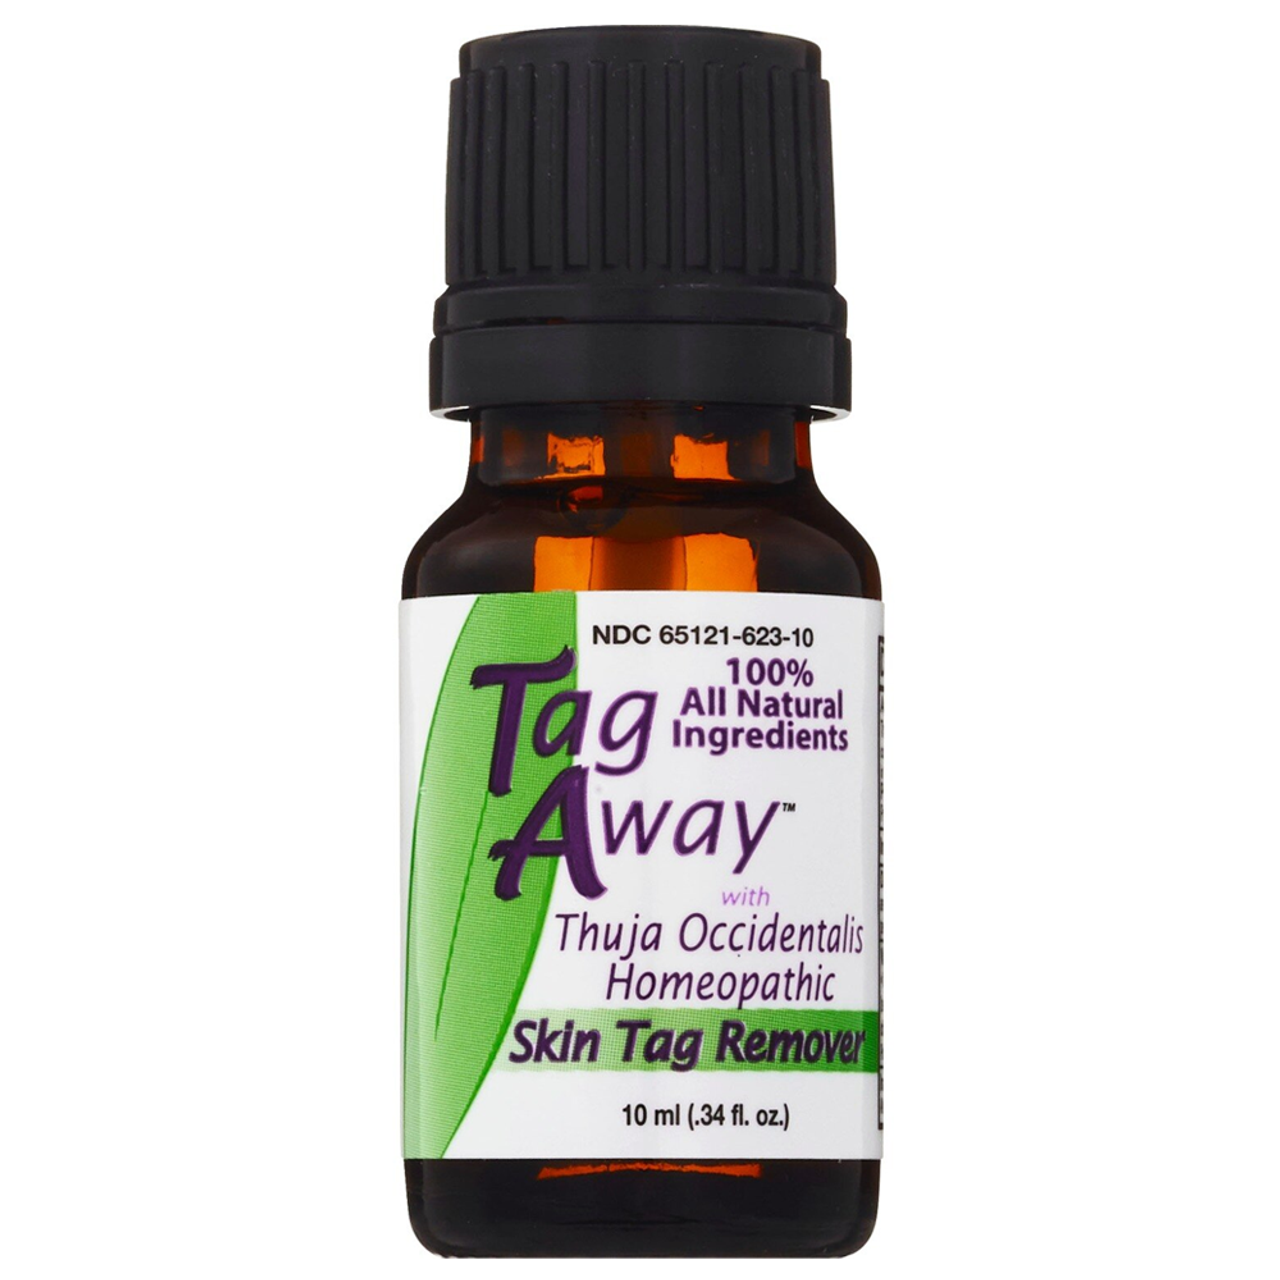 Tag Away™ Skin Tag Remover with Thuja Occidentalis, 0.34 fl. oz. product image